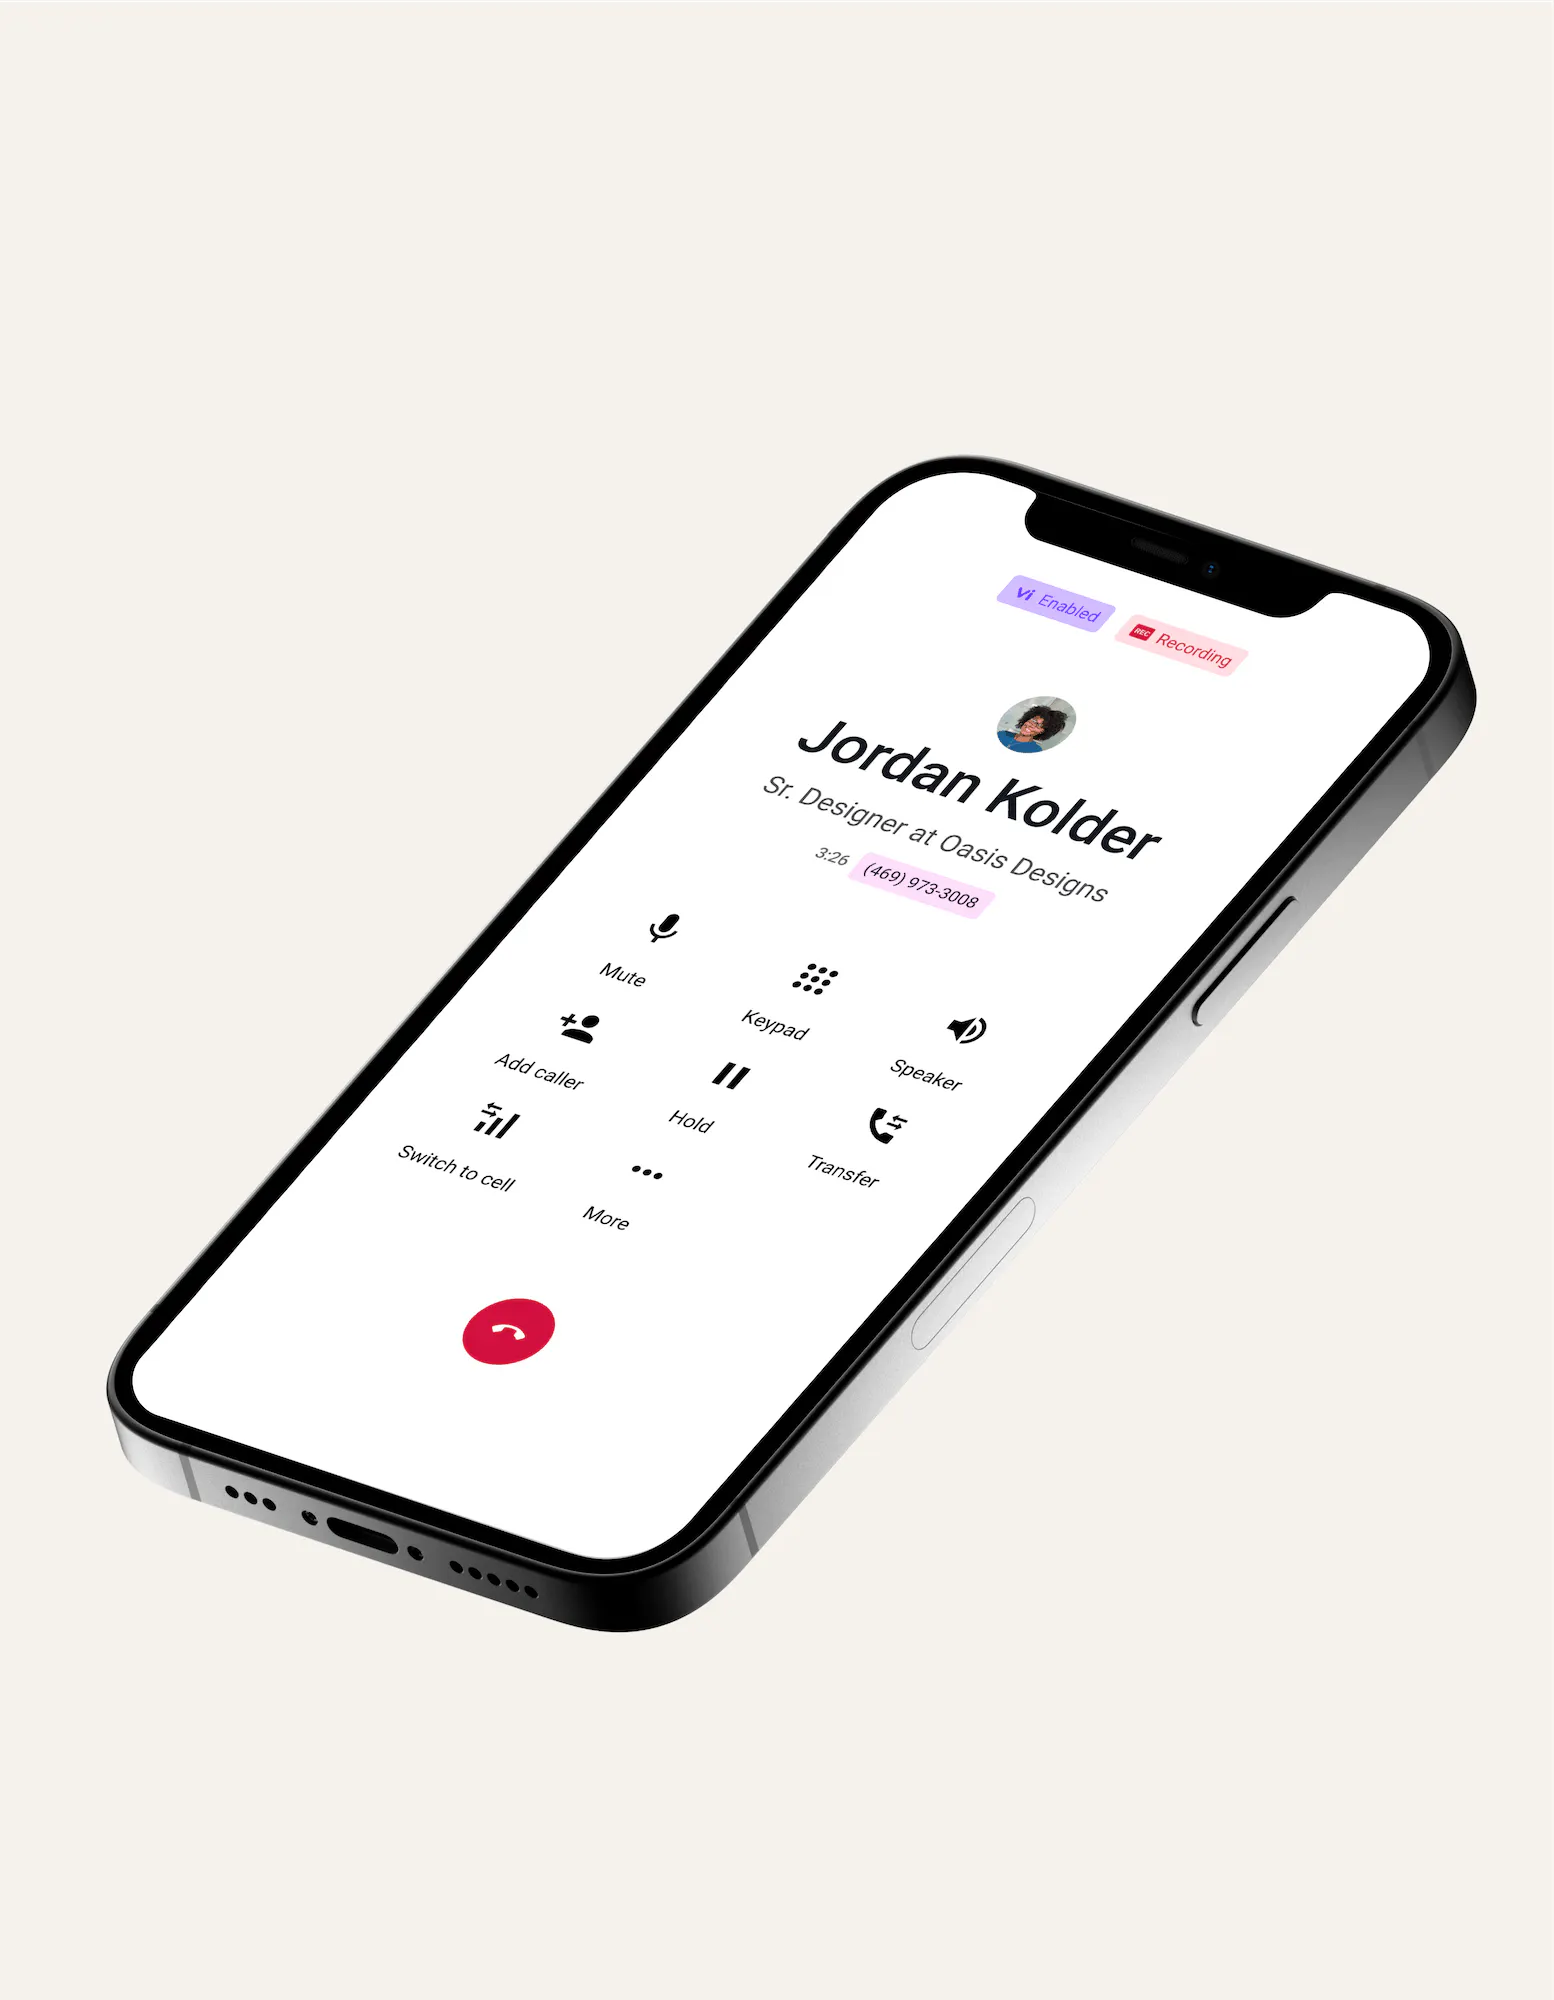 Mobile phone showing a call happening in Dialpad's app